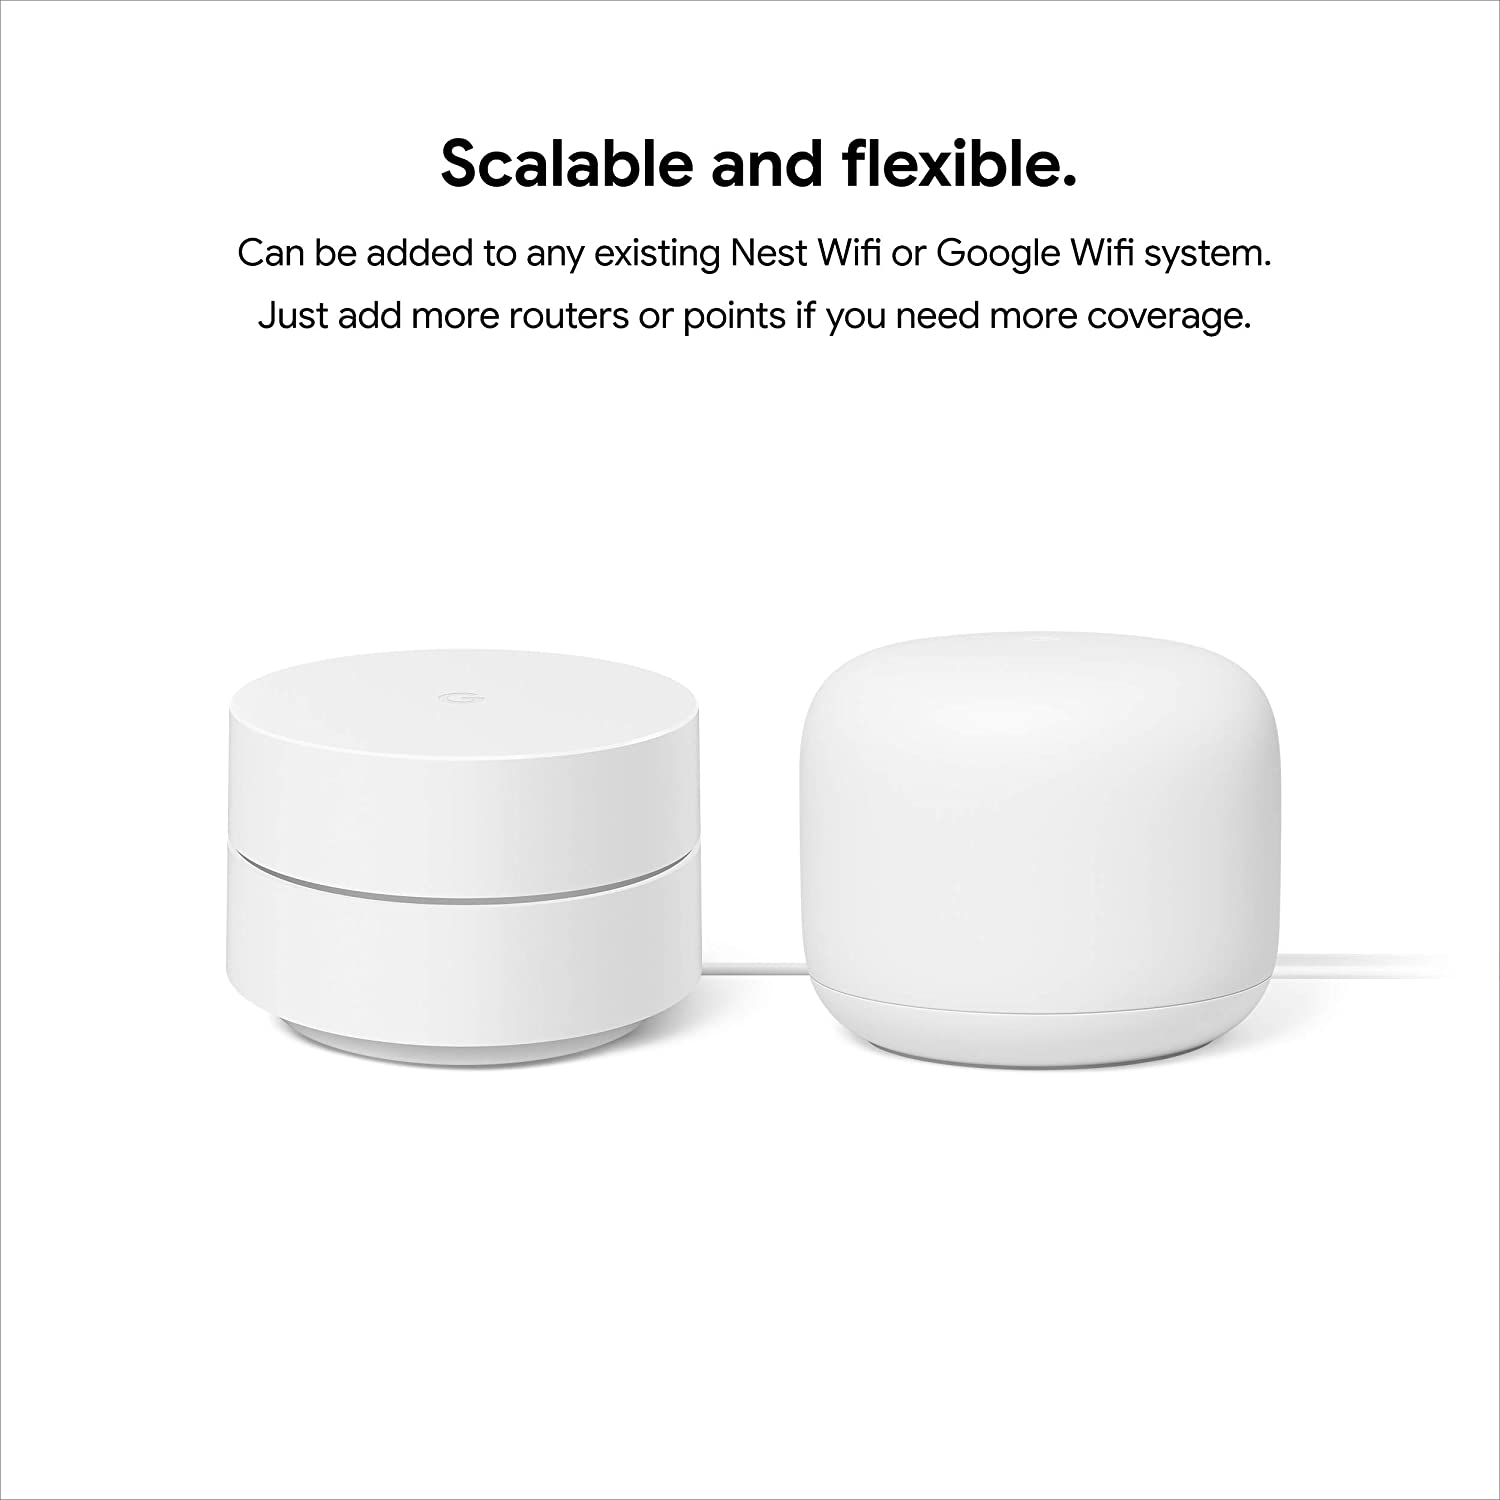 Google Nest Wifi - Home Wi-Fi System - Wi-Fi Extender - Mesh Router for Wireless Internet